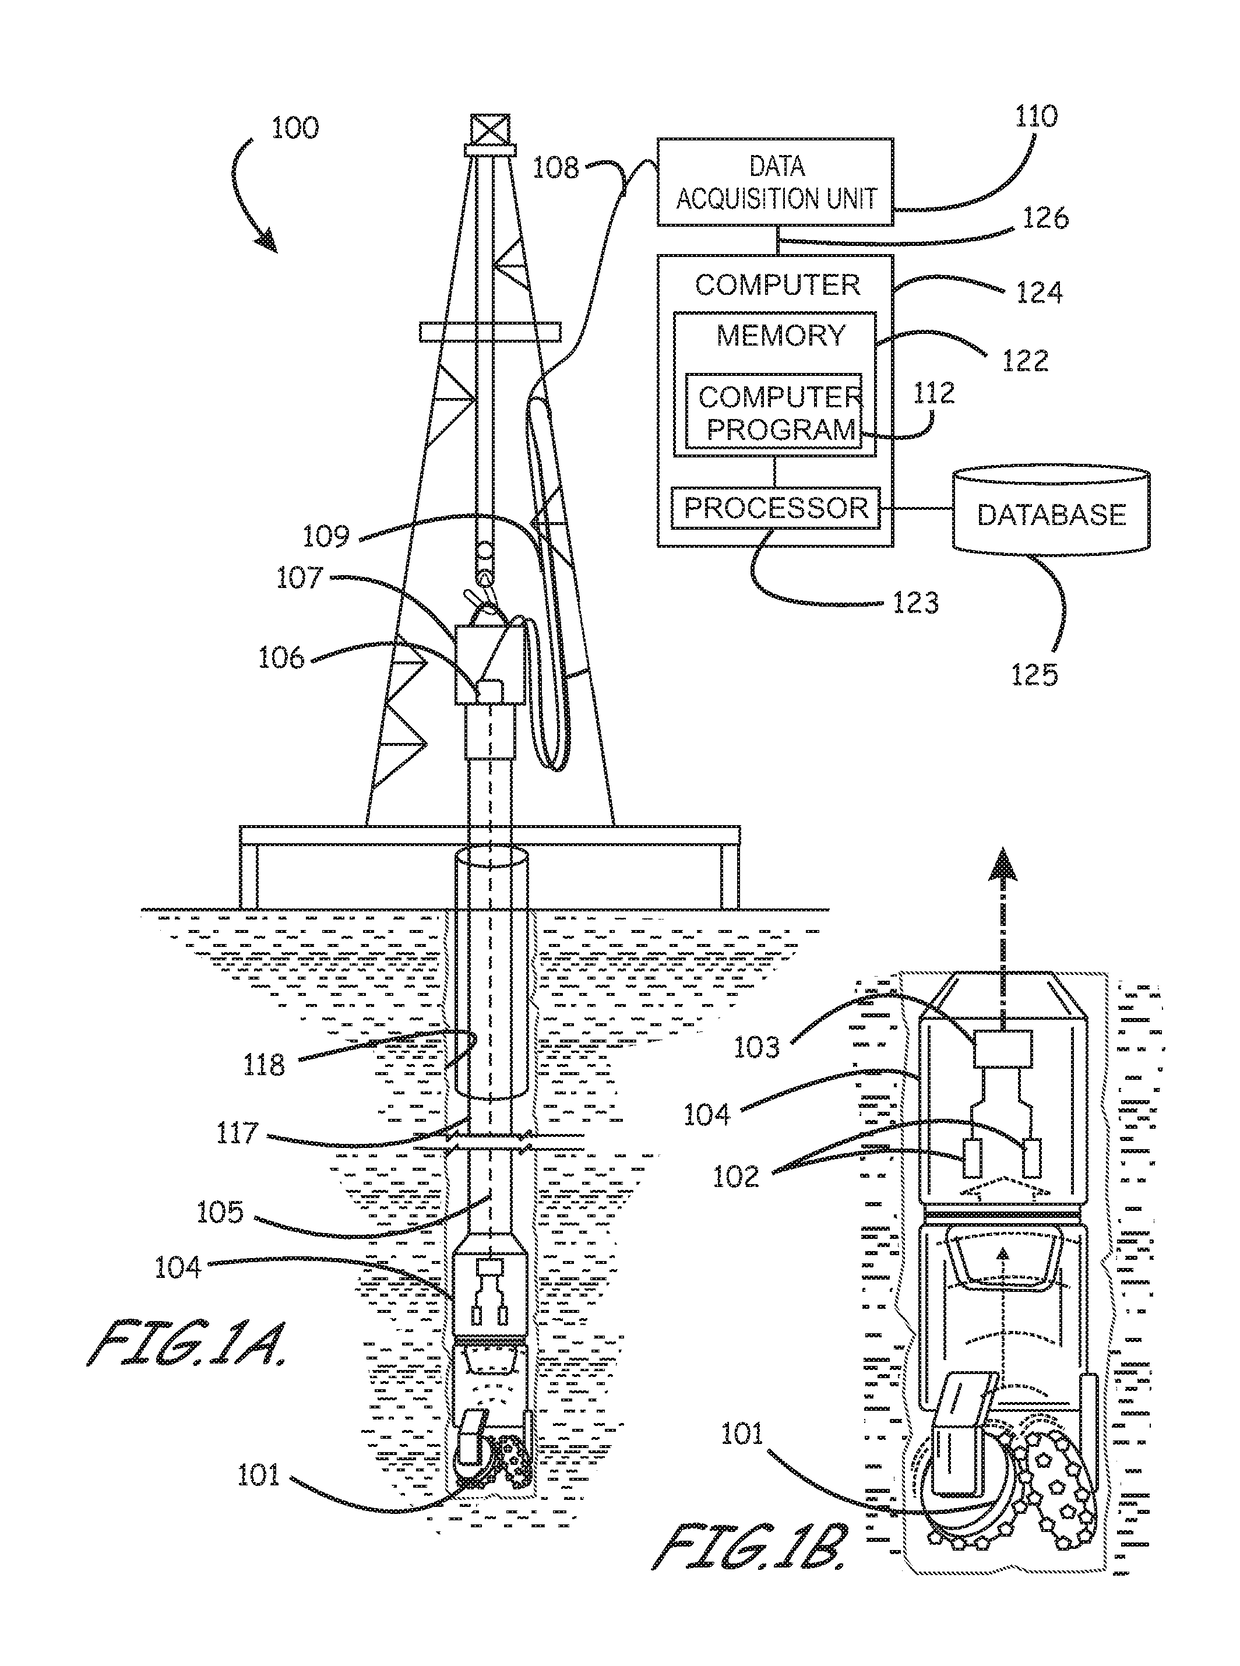 Methods of evaluating rock properties while drilling using downhole acoustic sensors and a downhole broadband transmitting system